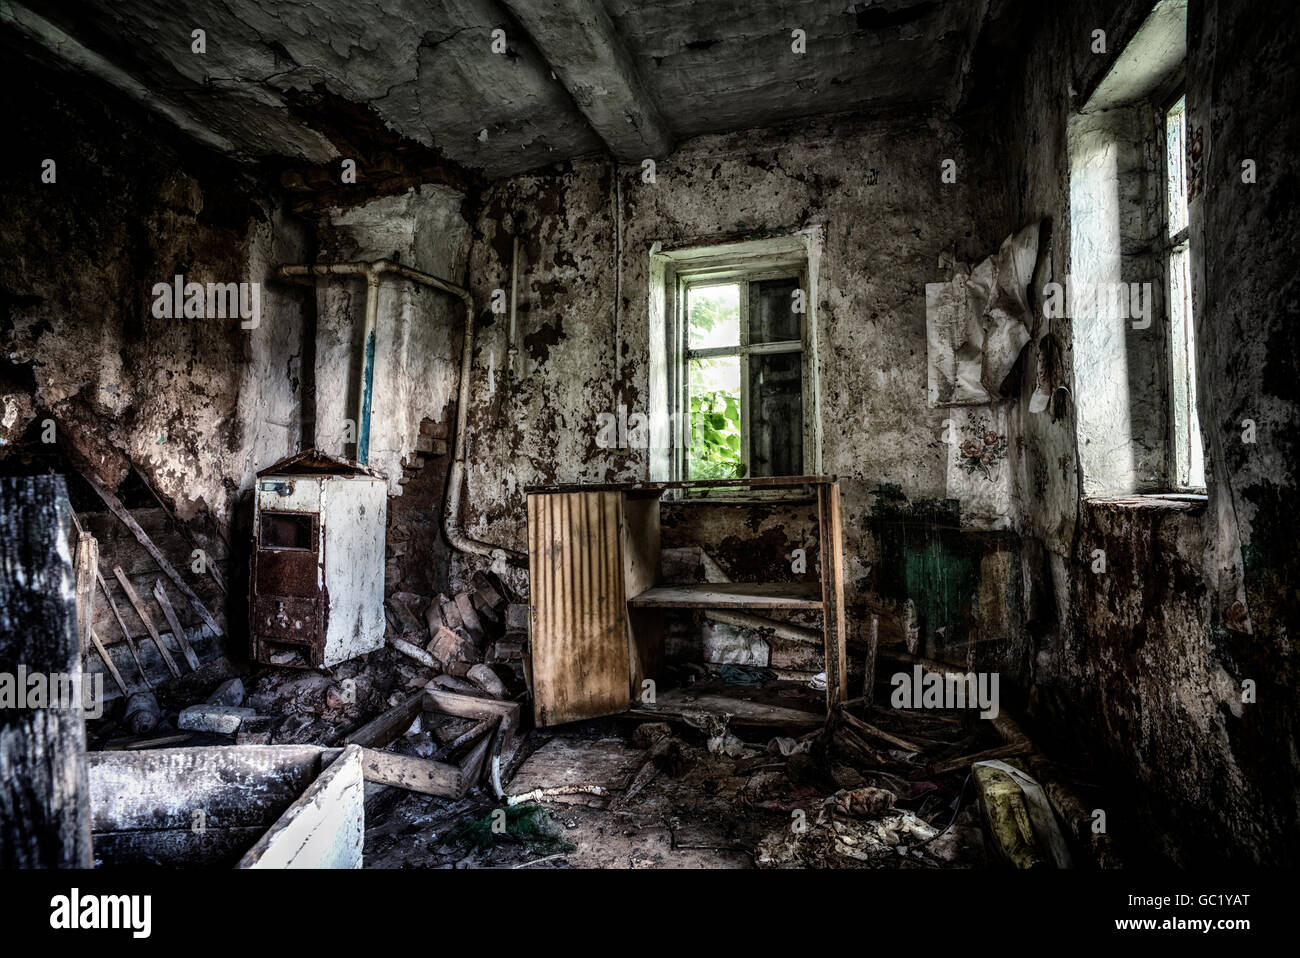 Old forgotten and abandoned home interior in a derelict decaying state with grimy floors and ripped wallpaper. Stock Photo